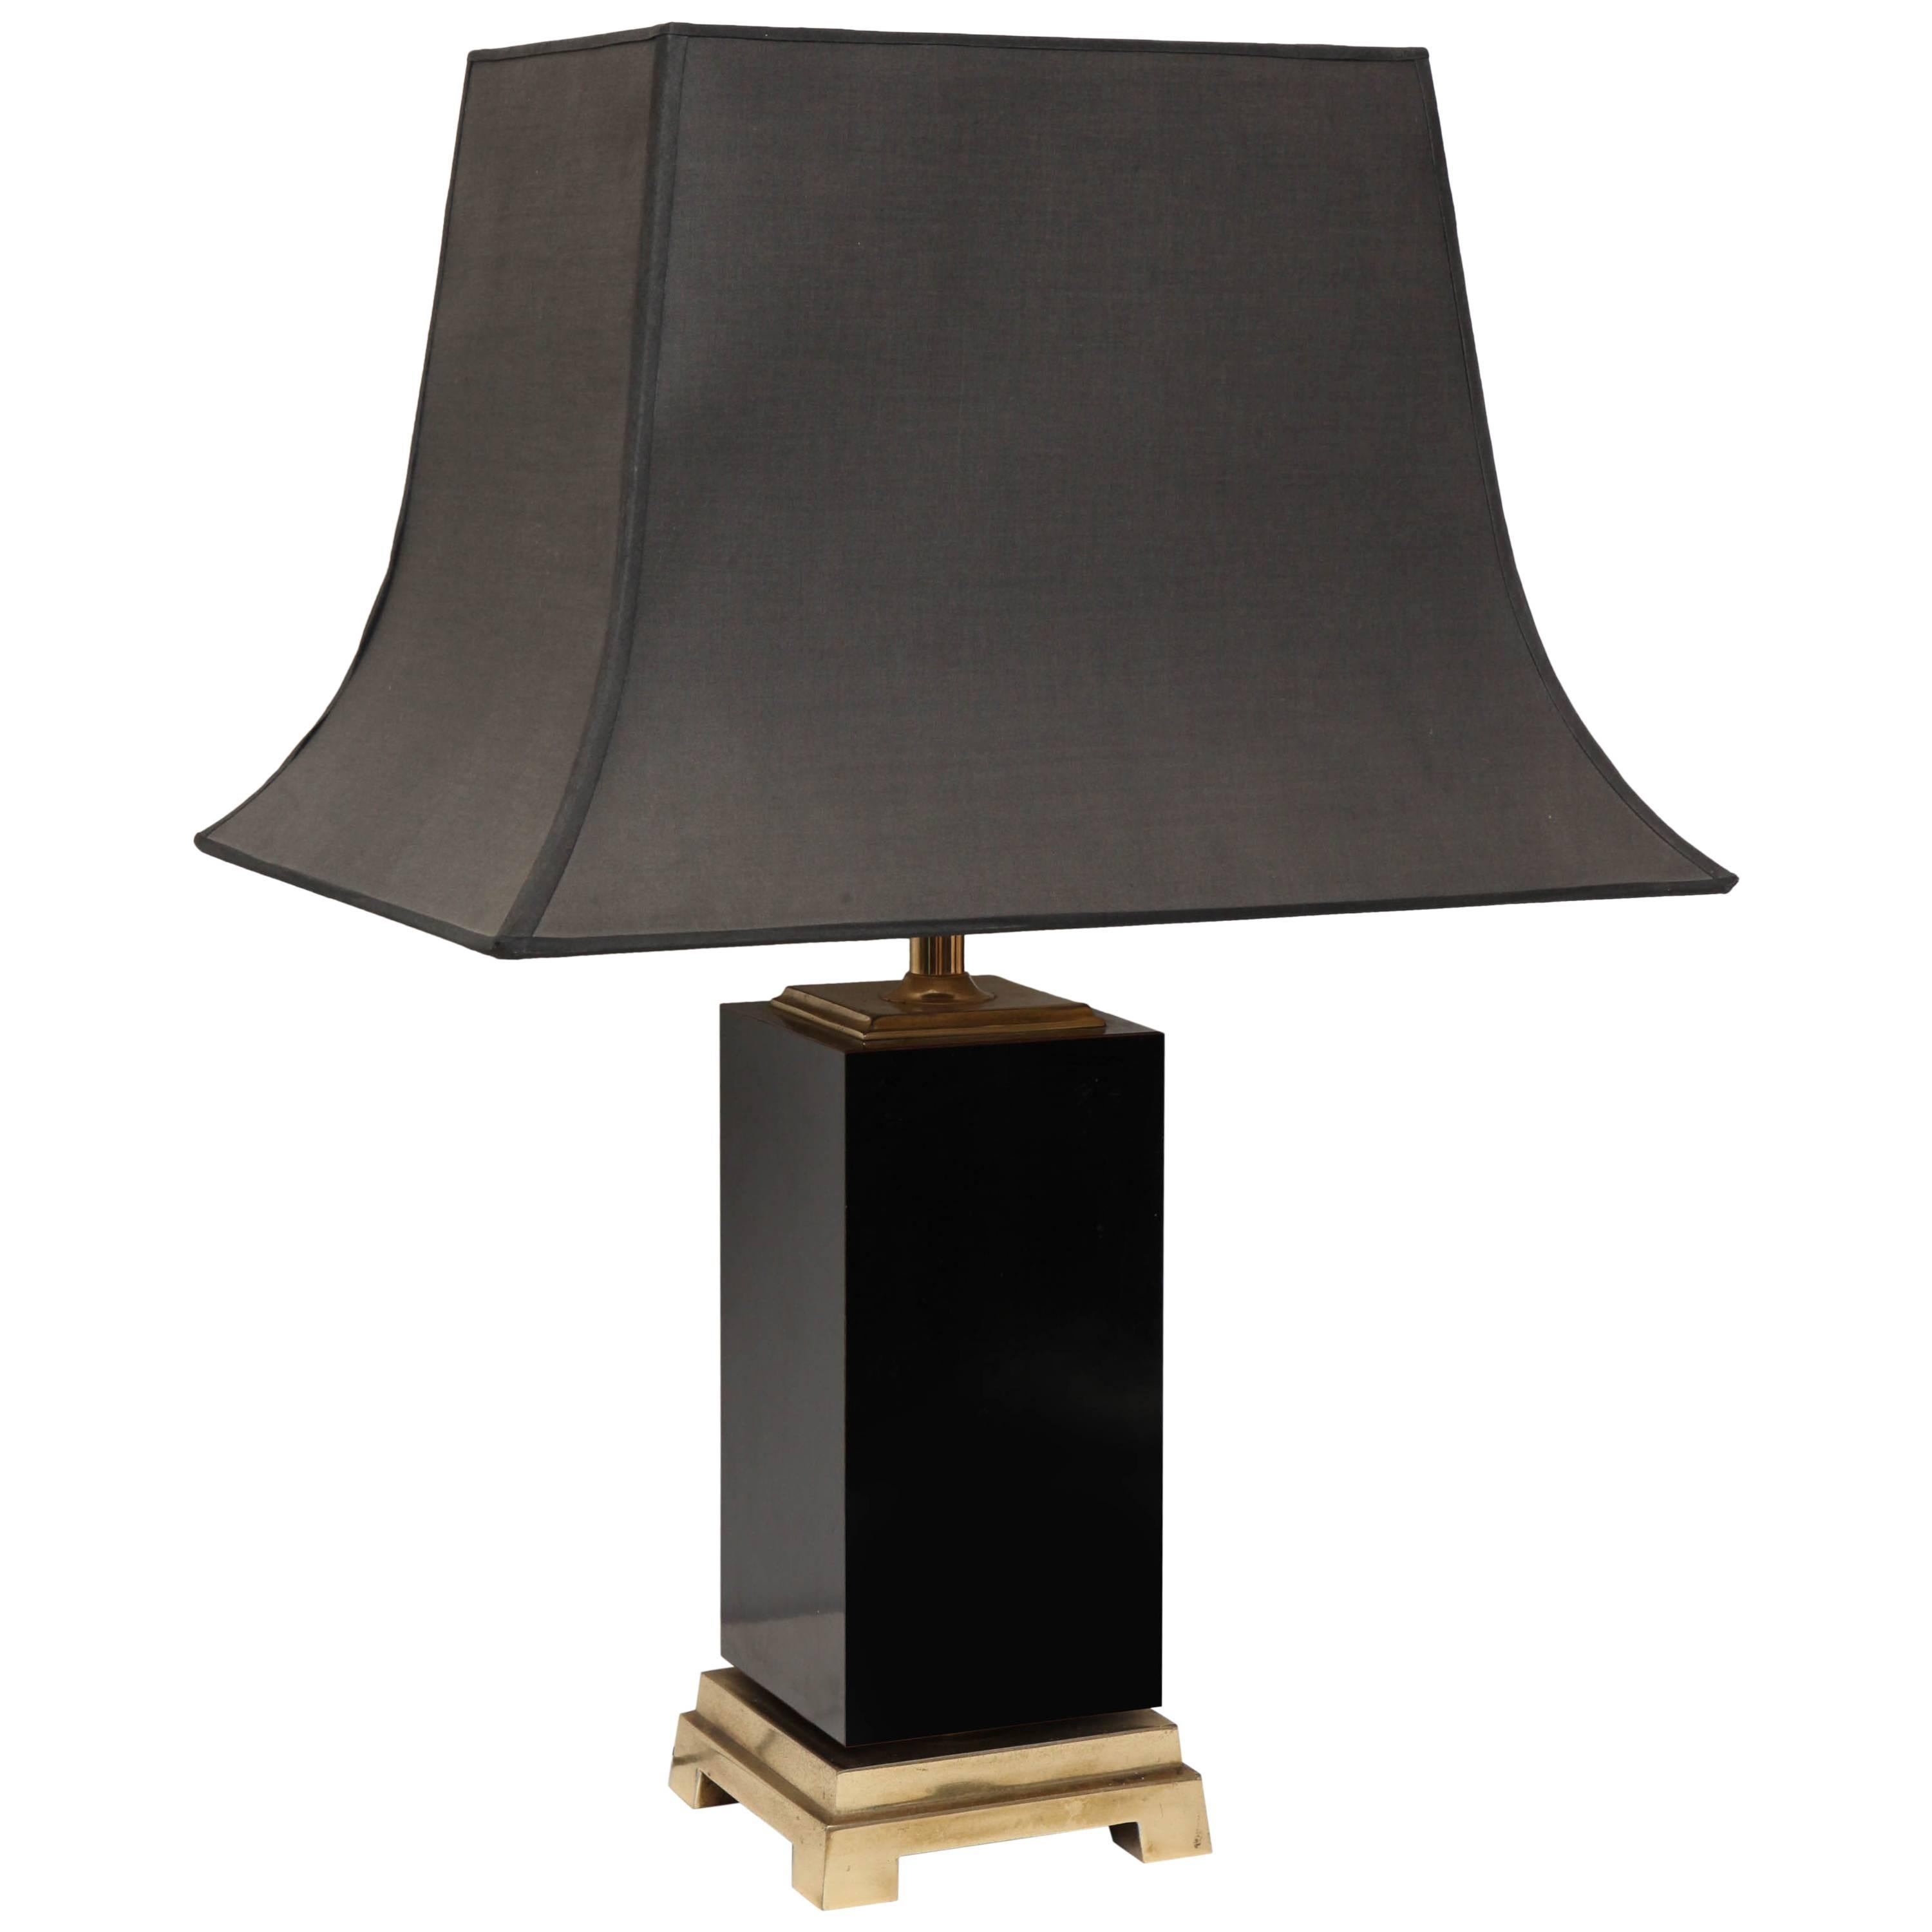 Art Deco Table Lamp in the Chinois Style